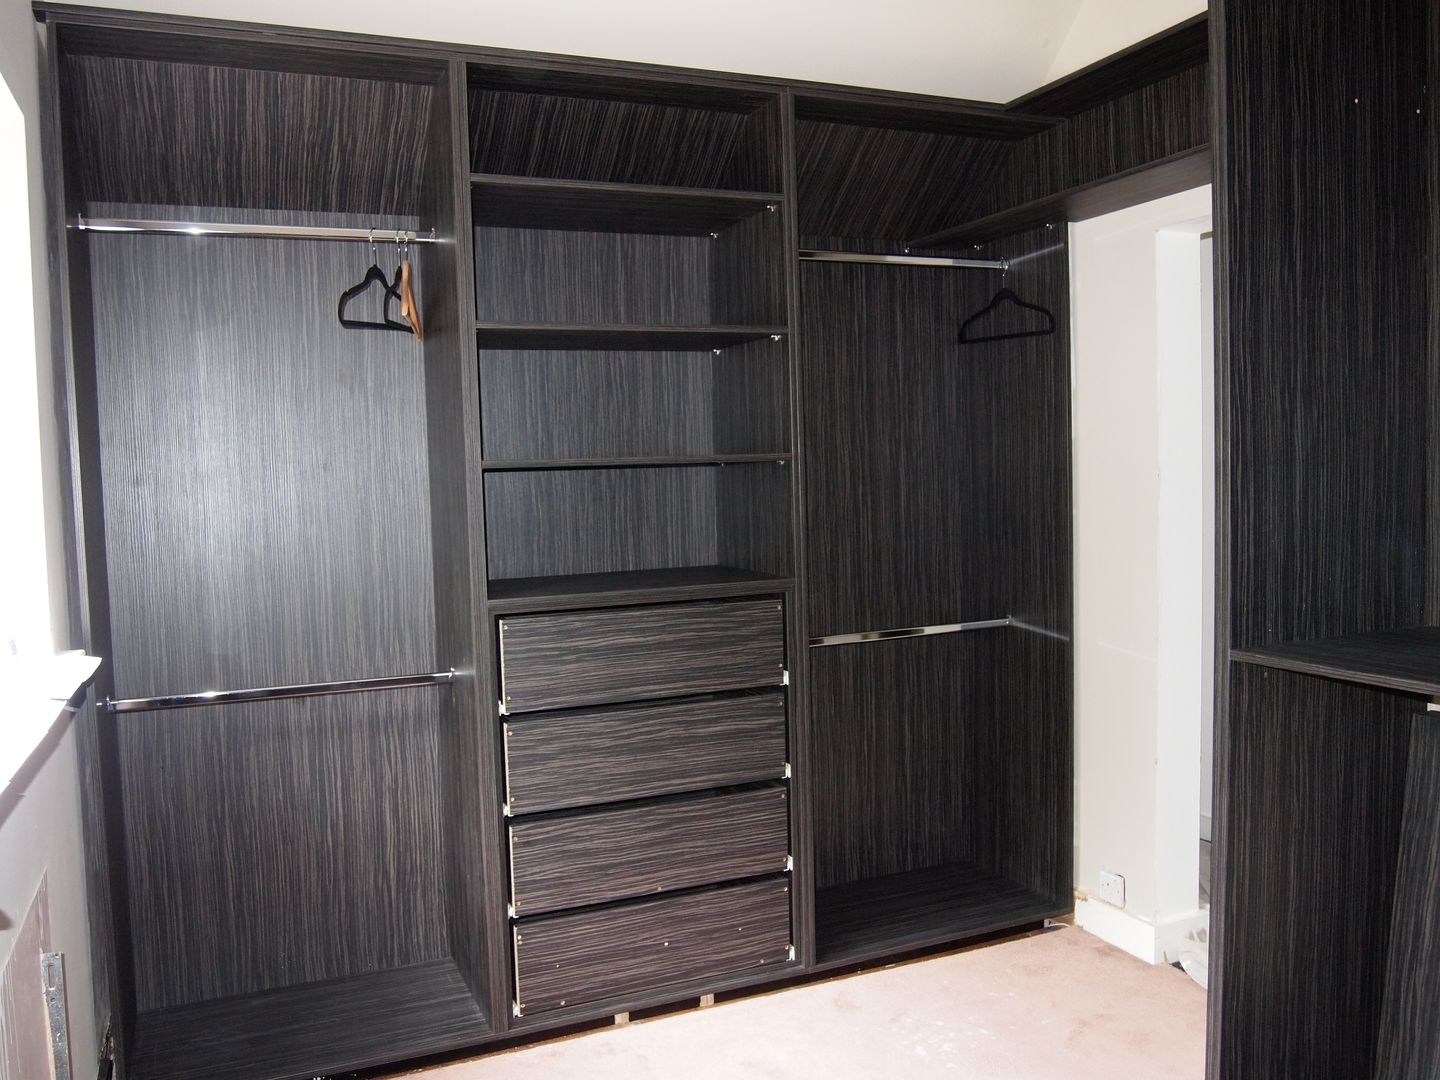 walk in his and her's wardrobes. before and after photos., Designer Vision and Sound: Bespoke Cabinet Making Designer Vision and Sound: Bespoke Cabinet Making Moderne Ankleidezimmer